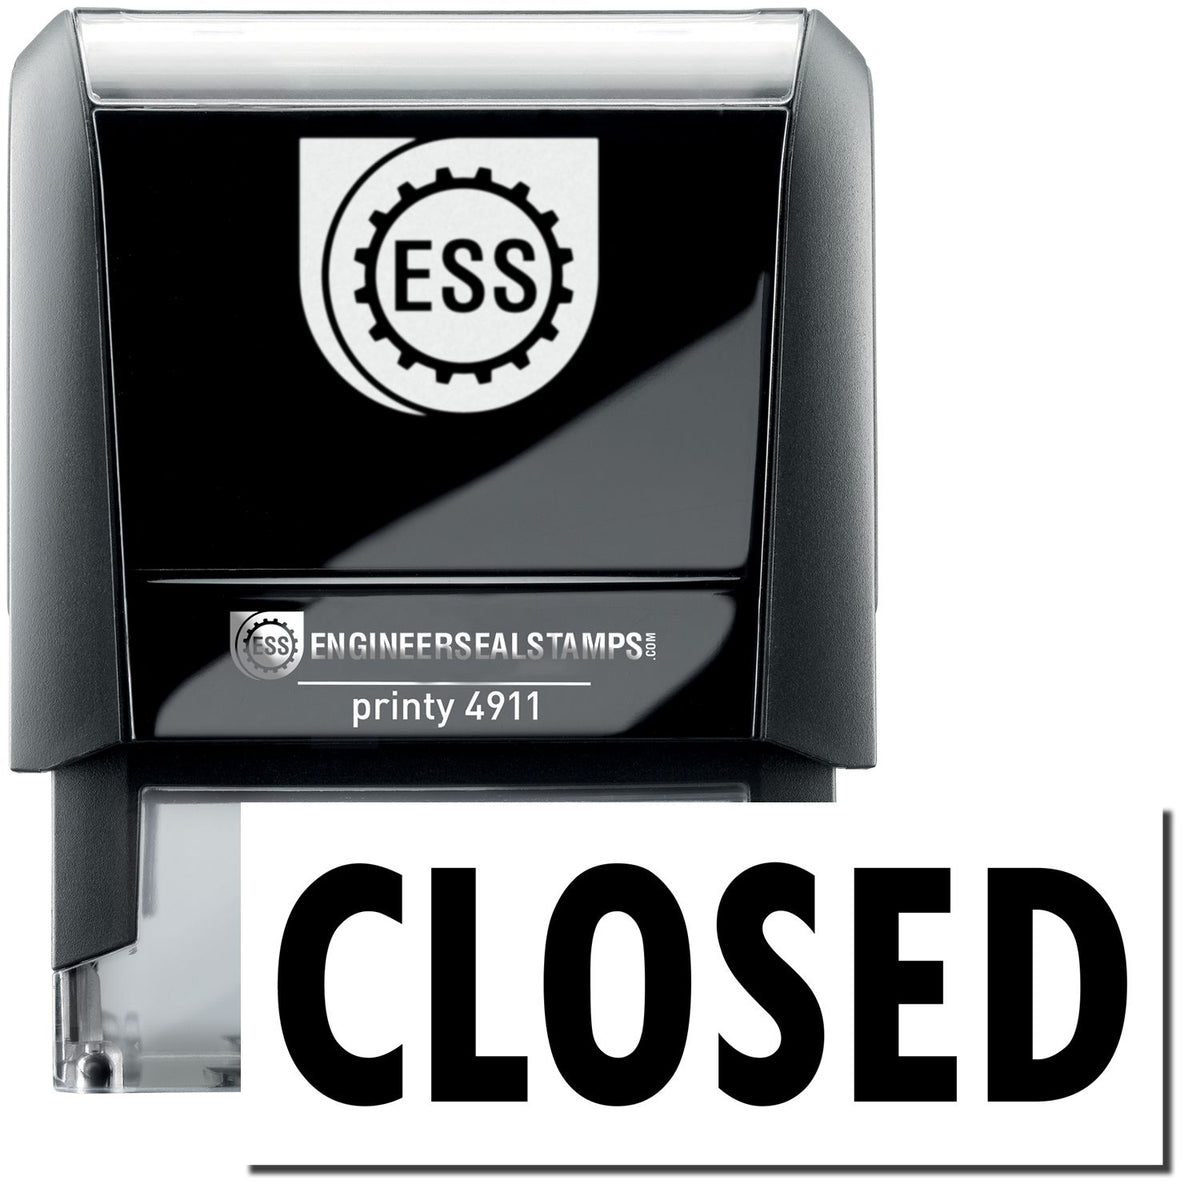 A self-inking stamp with a stamped image showing how the text &quot;CLOSED&quot; is displayed after stamping.